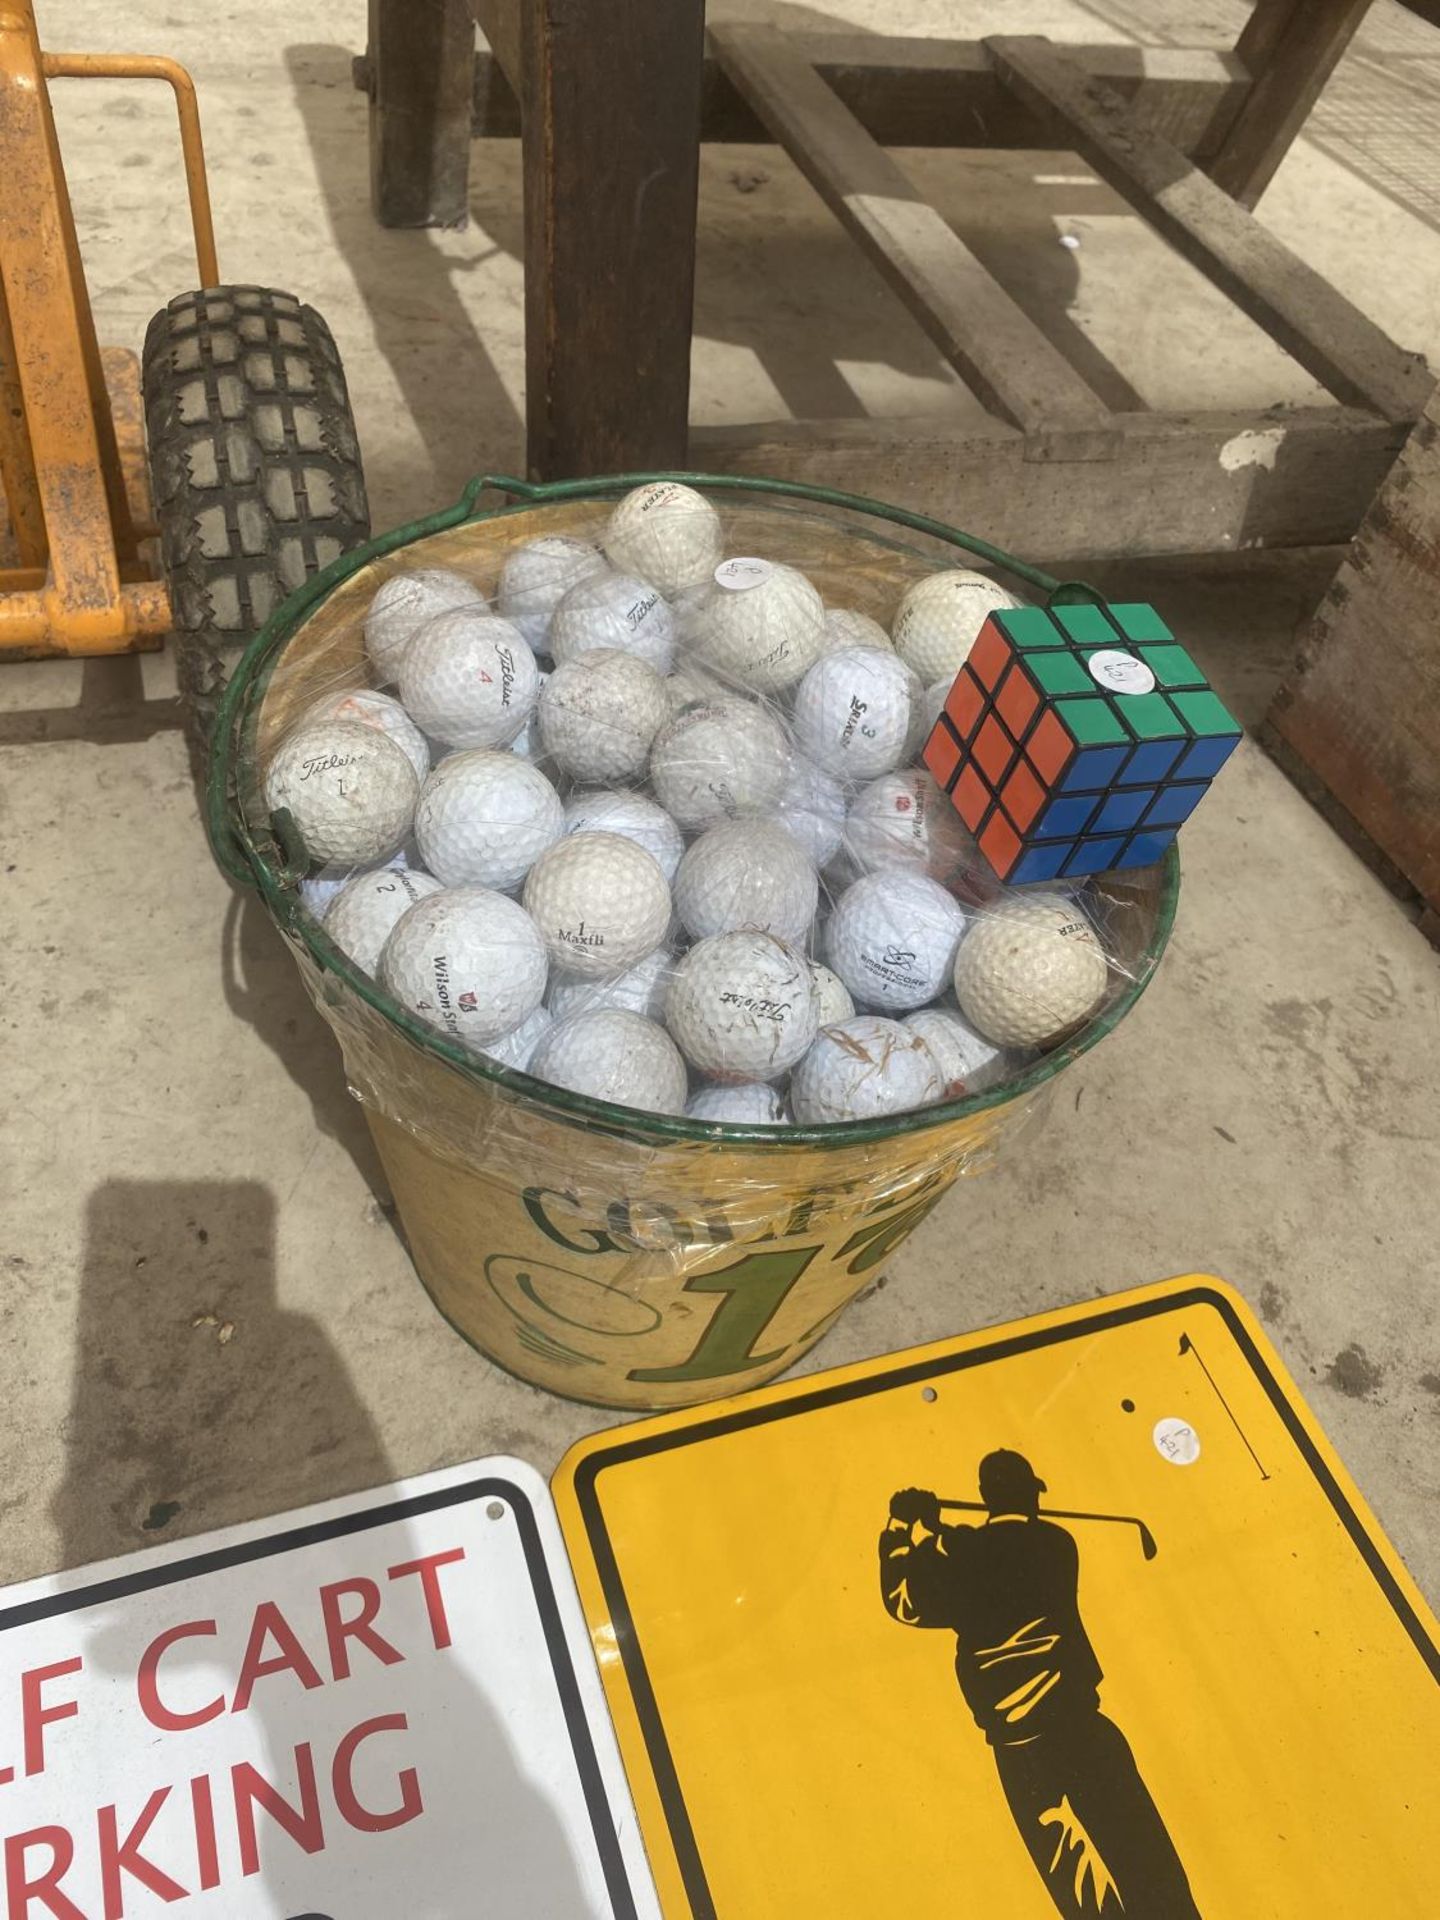 A LARGE QUANTITY OF GOLF BALLS, TWO GOLF RELATED SIGNS AND A GOLF BUCKET - Image 4 of 4